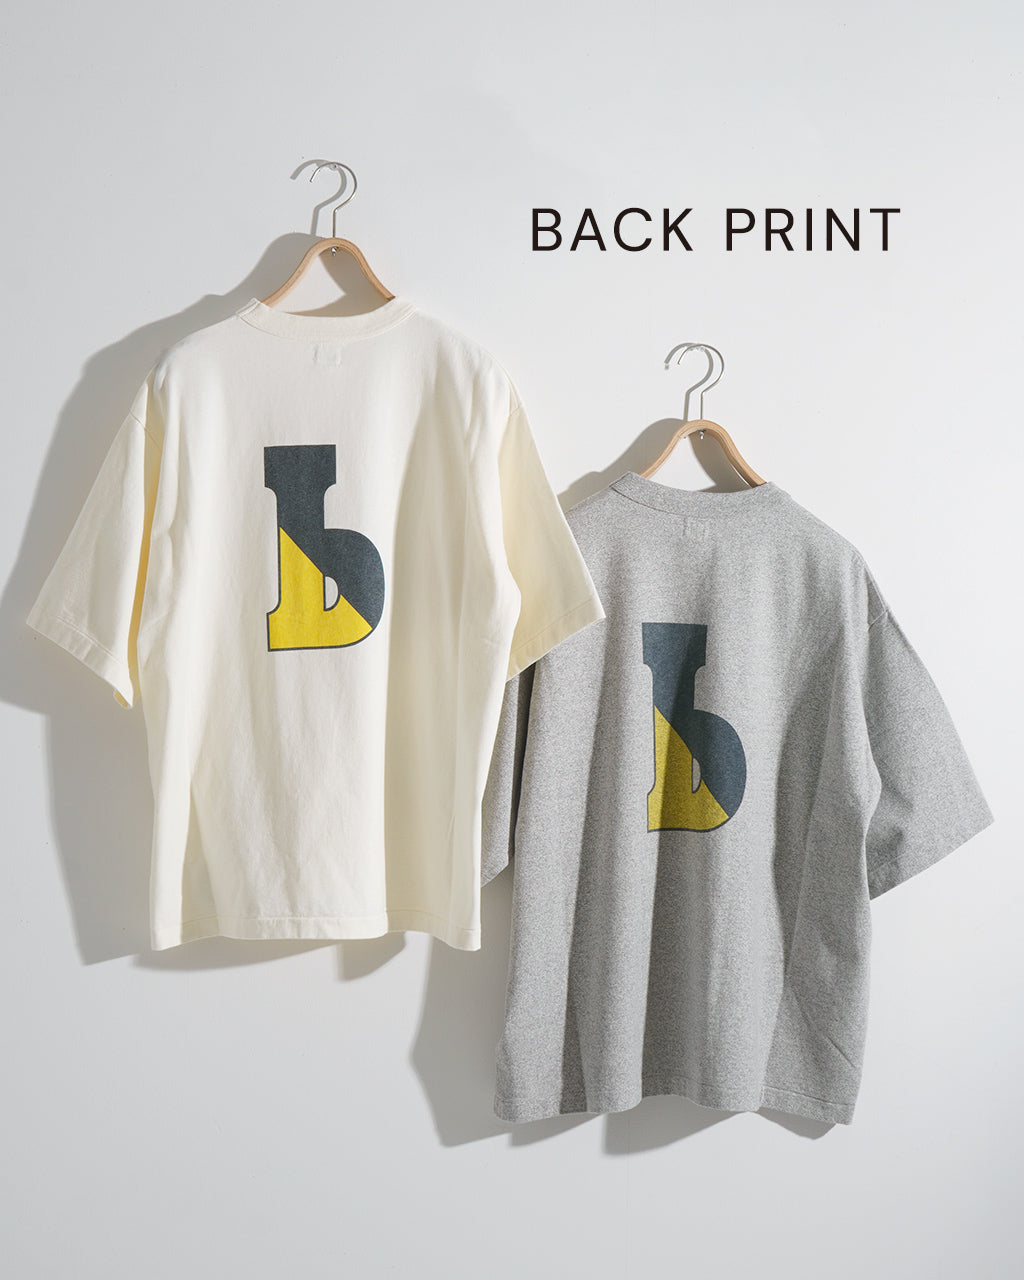 blurhms ROOTSTOCK ブラームス ルーツストック プリント Tシャツ ワイド b-ROOTSTOCK 88/12 Print Tee WIDE【送料無料】正規取扱店